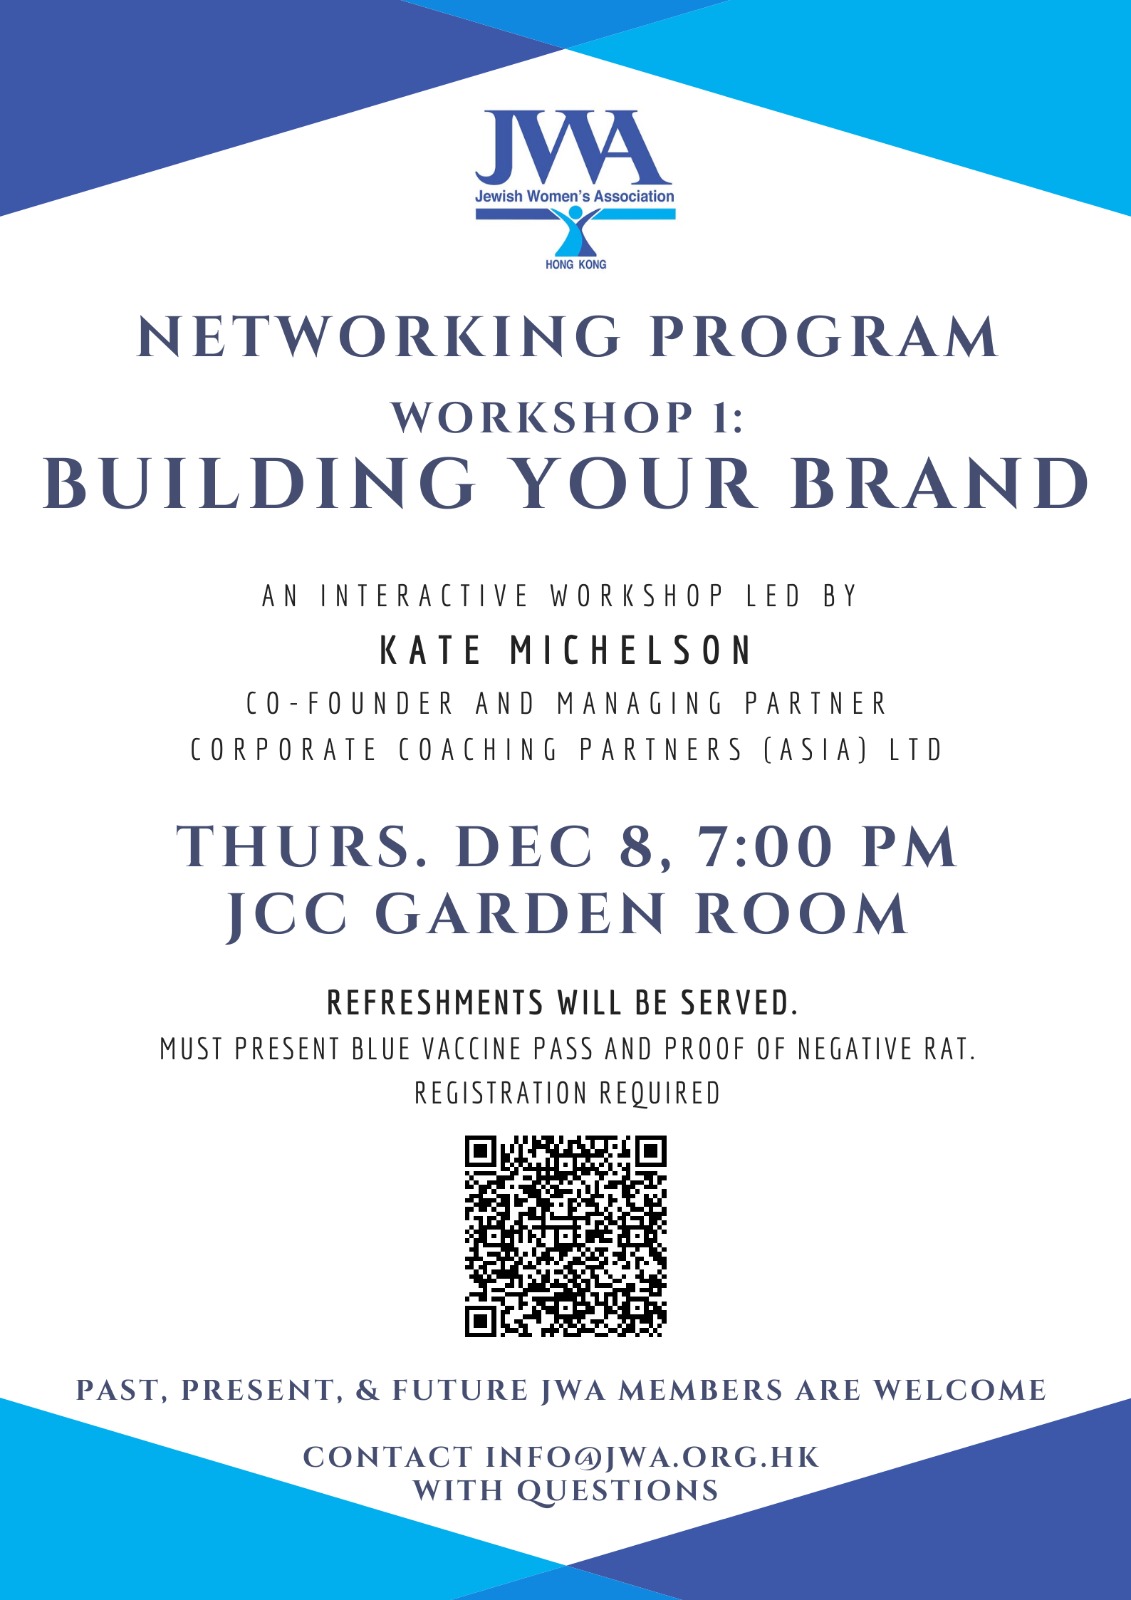 JWA - Build your Brand - with Kate Michelson